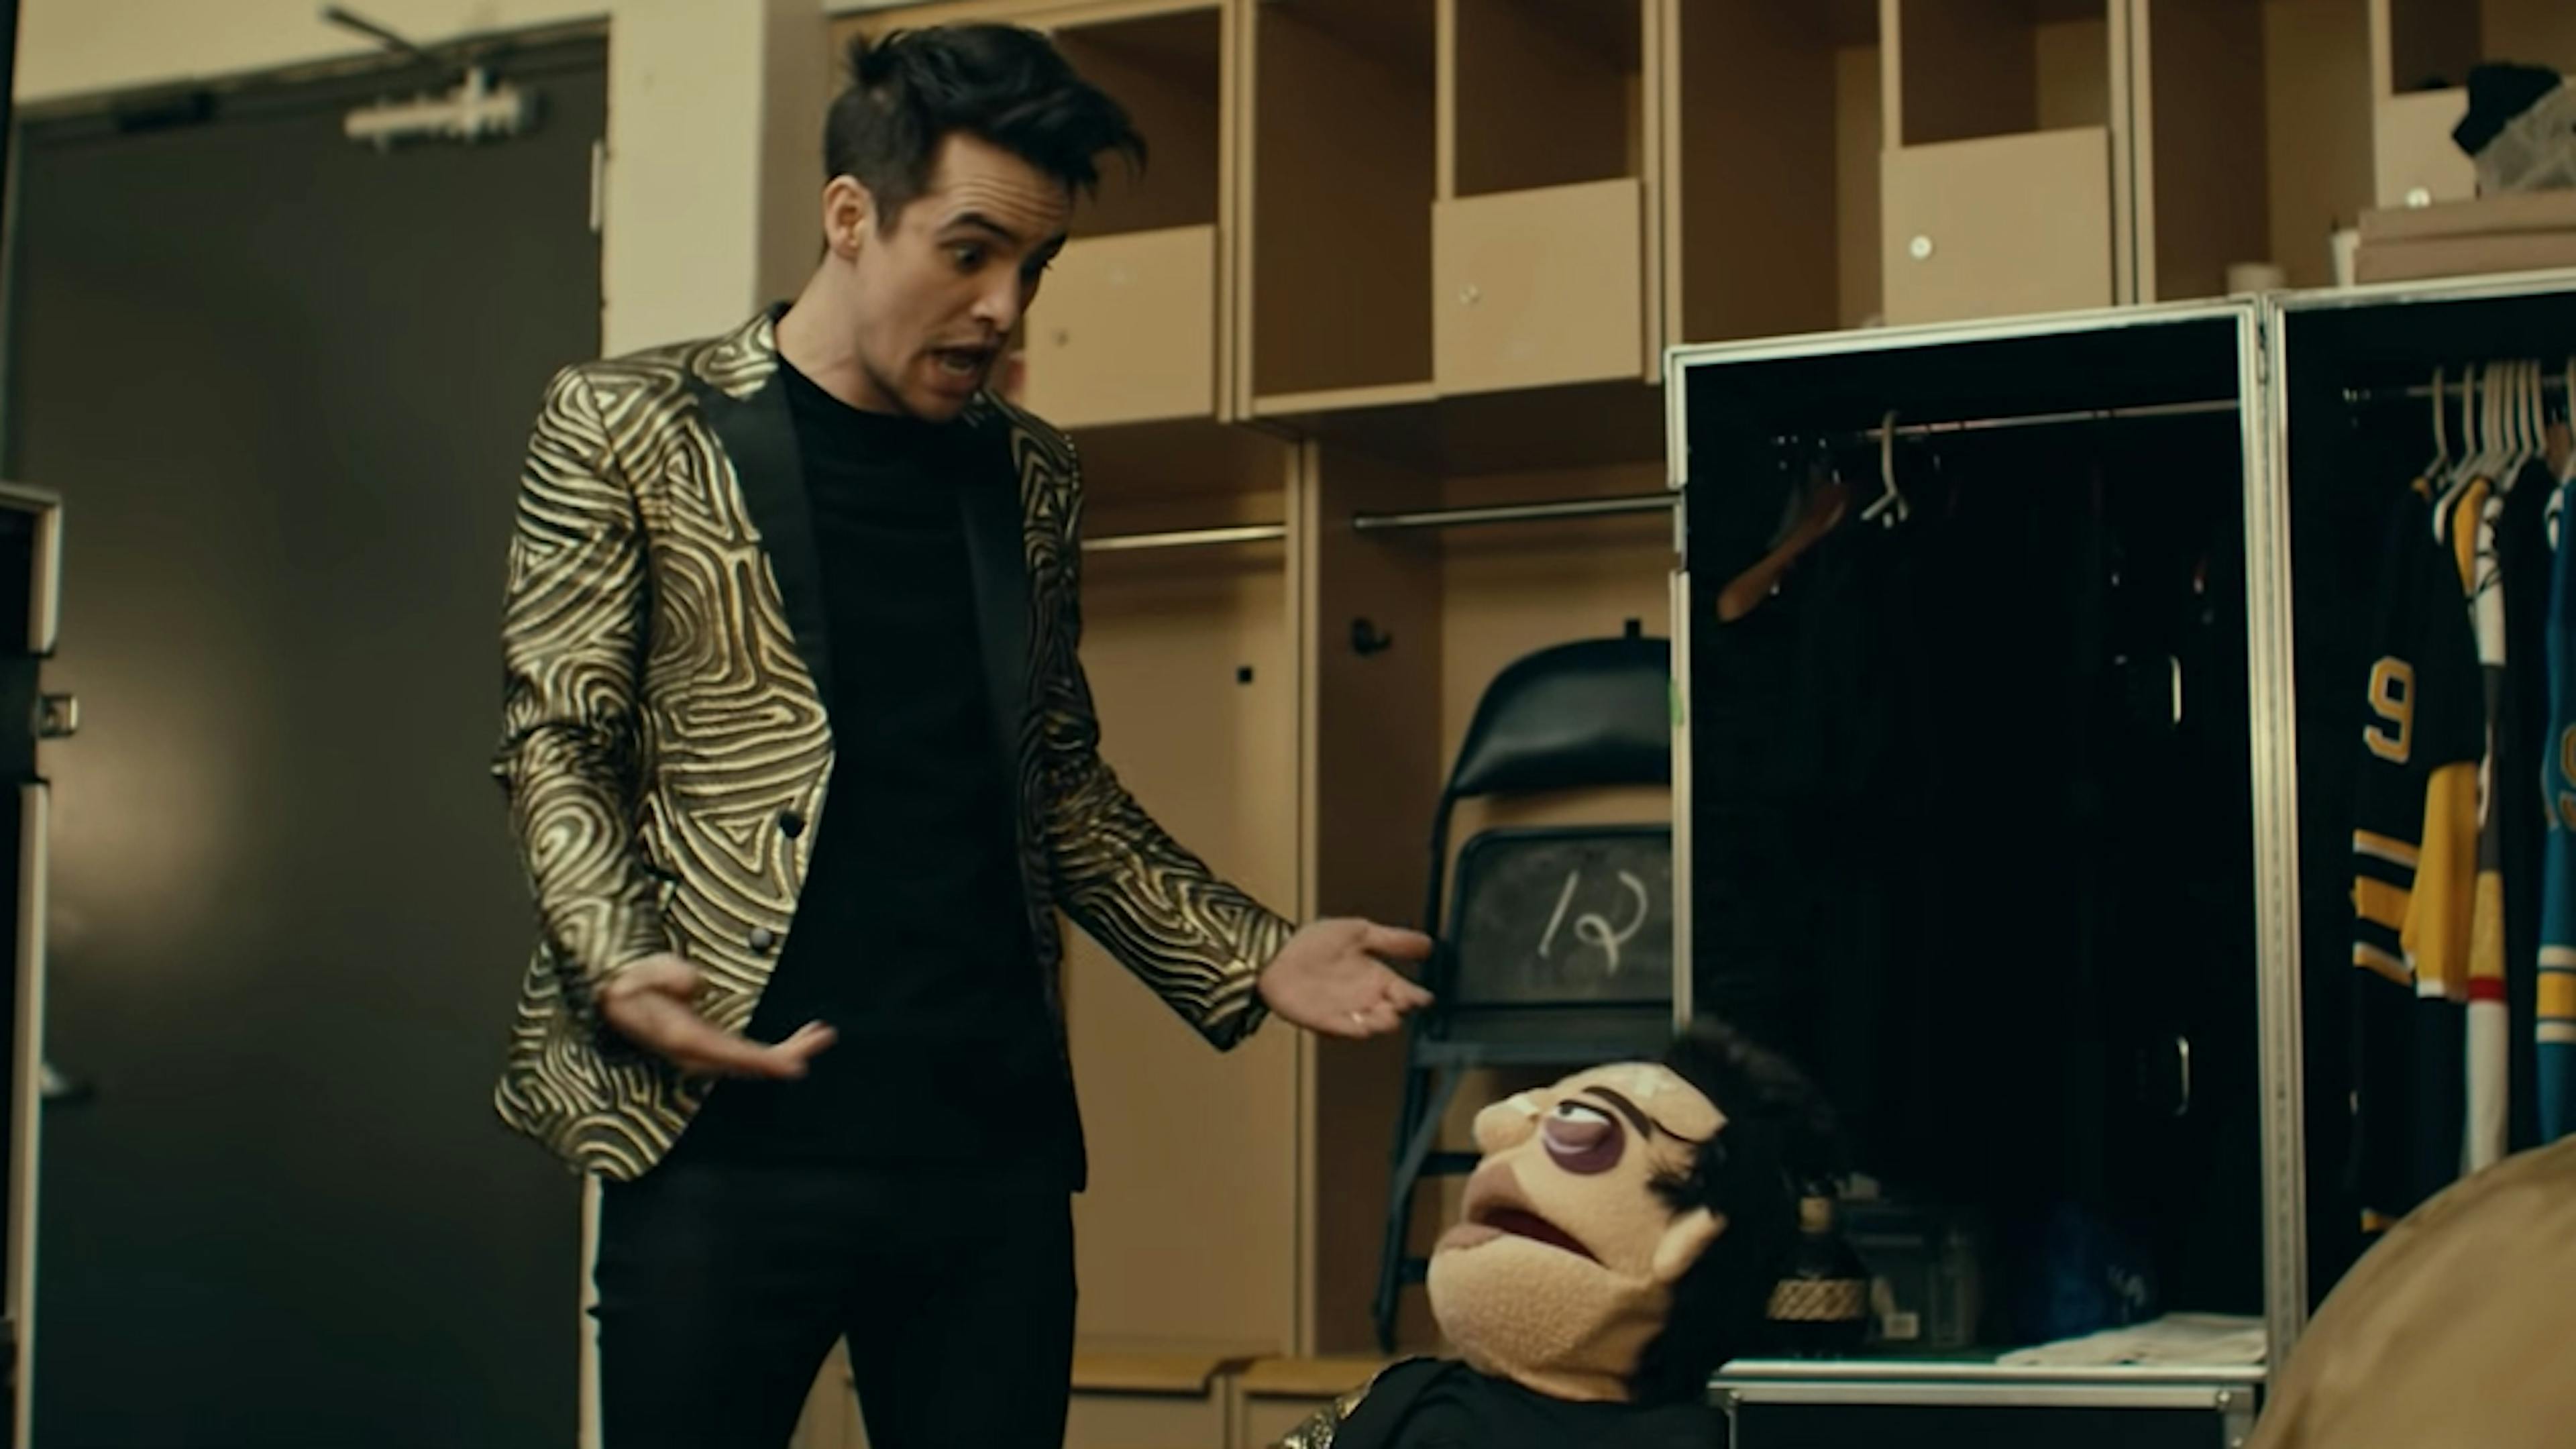 Watch Panic! At The Disco's New Video For Dancing's Not A Crime